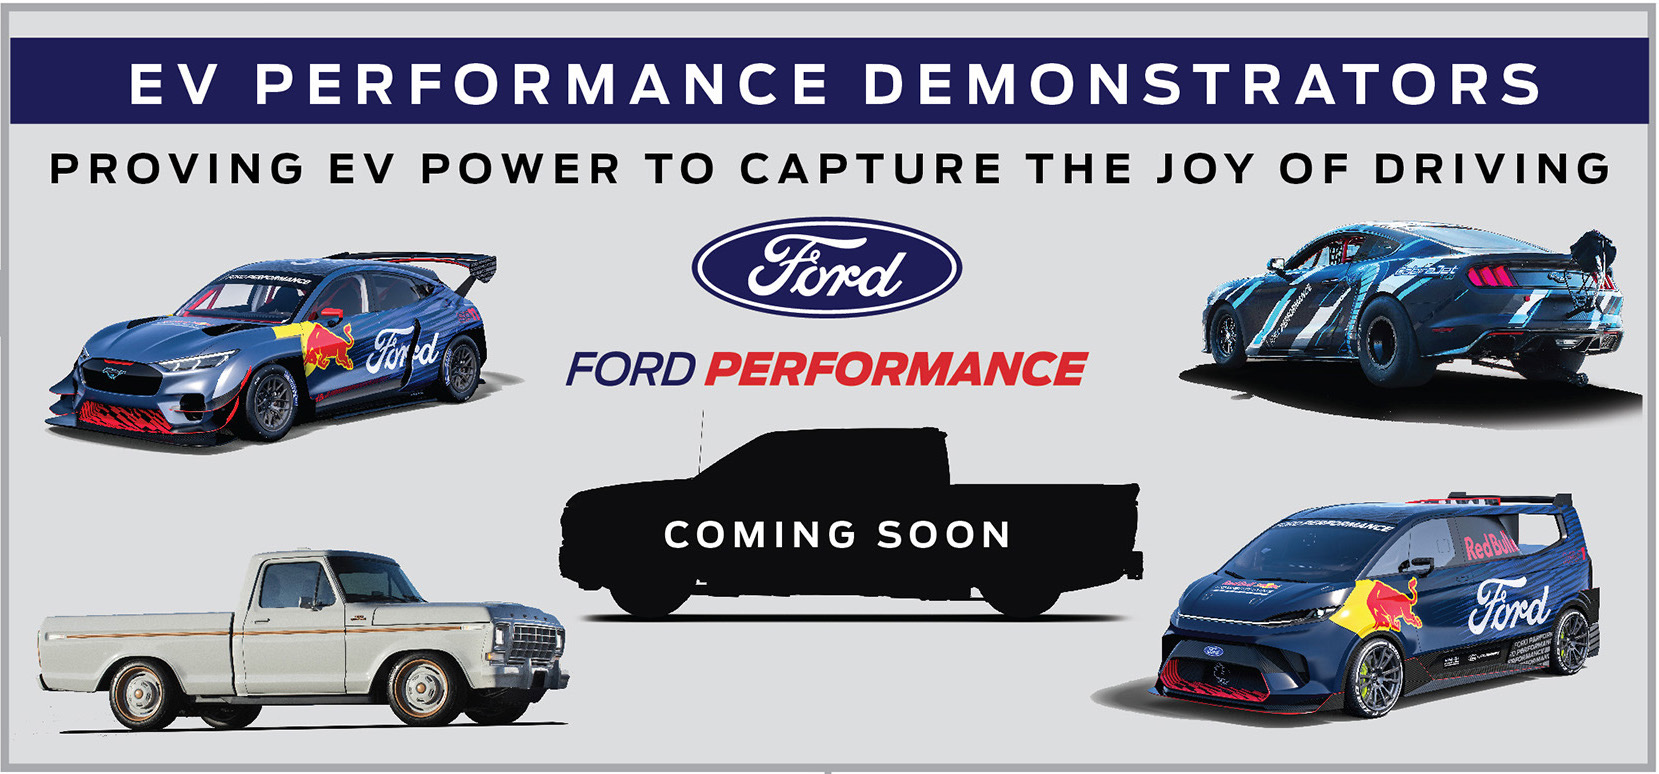 Ford Performance previews special higher-powered F-150 Lightning